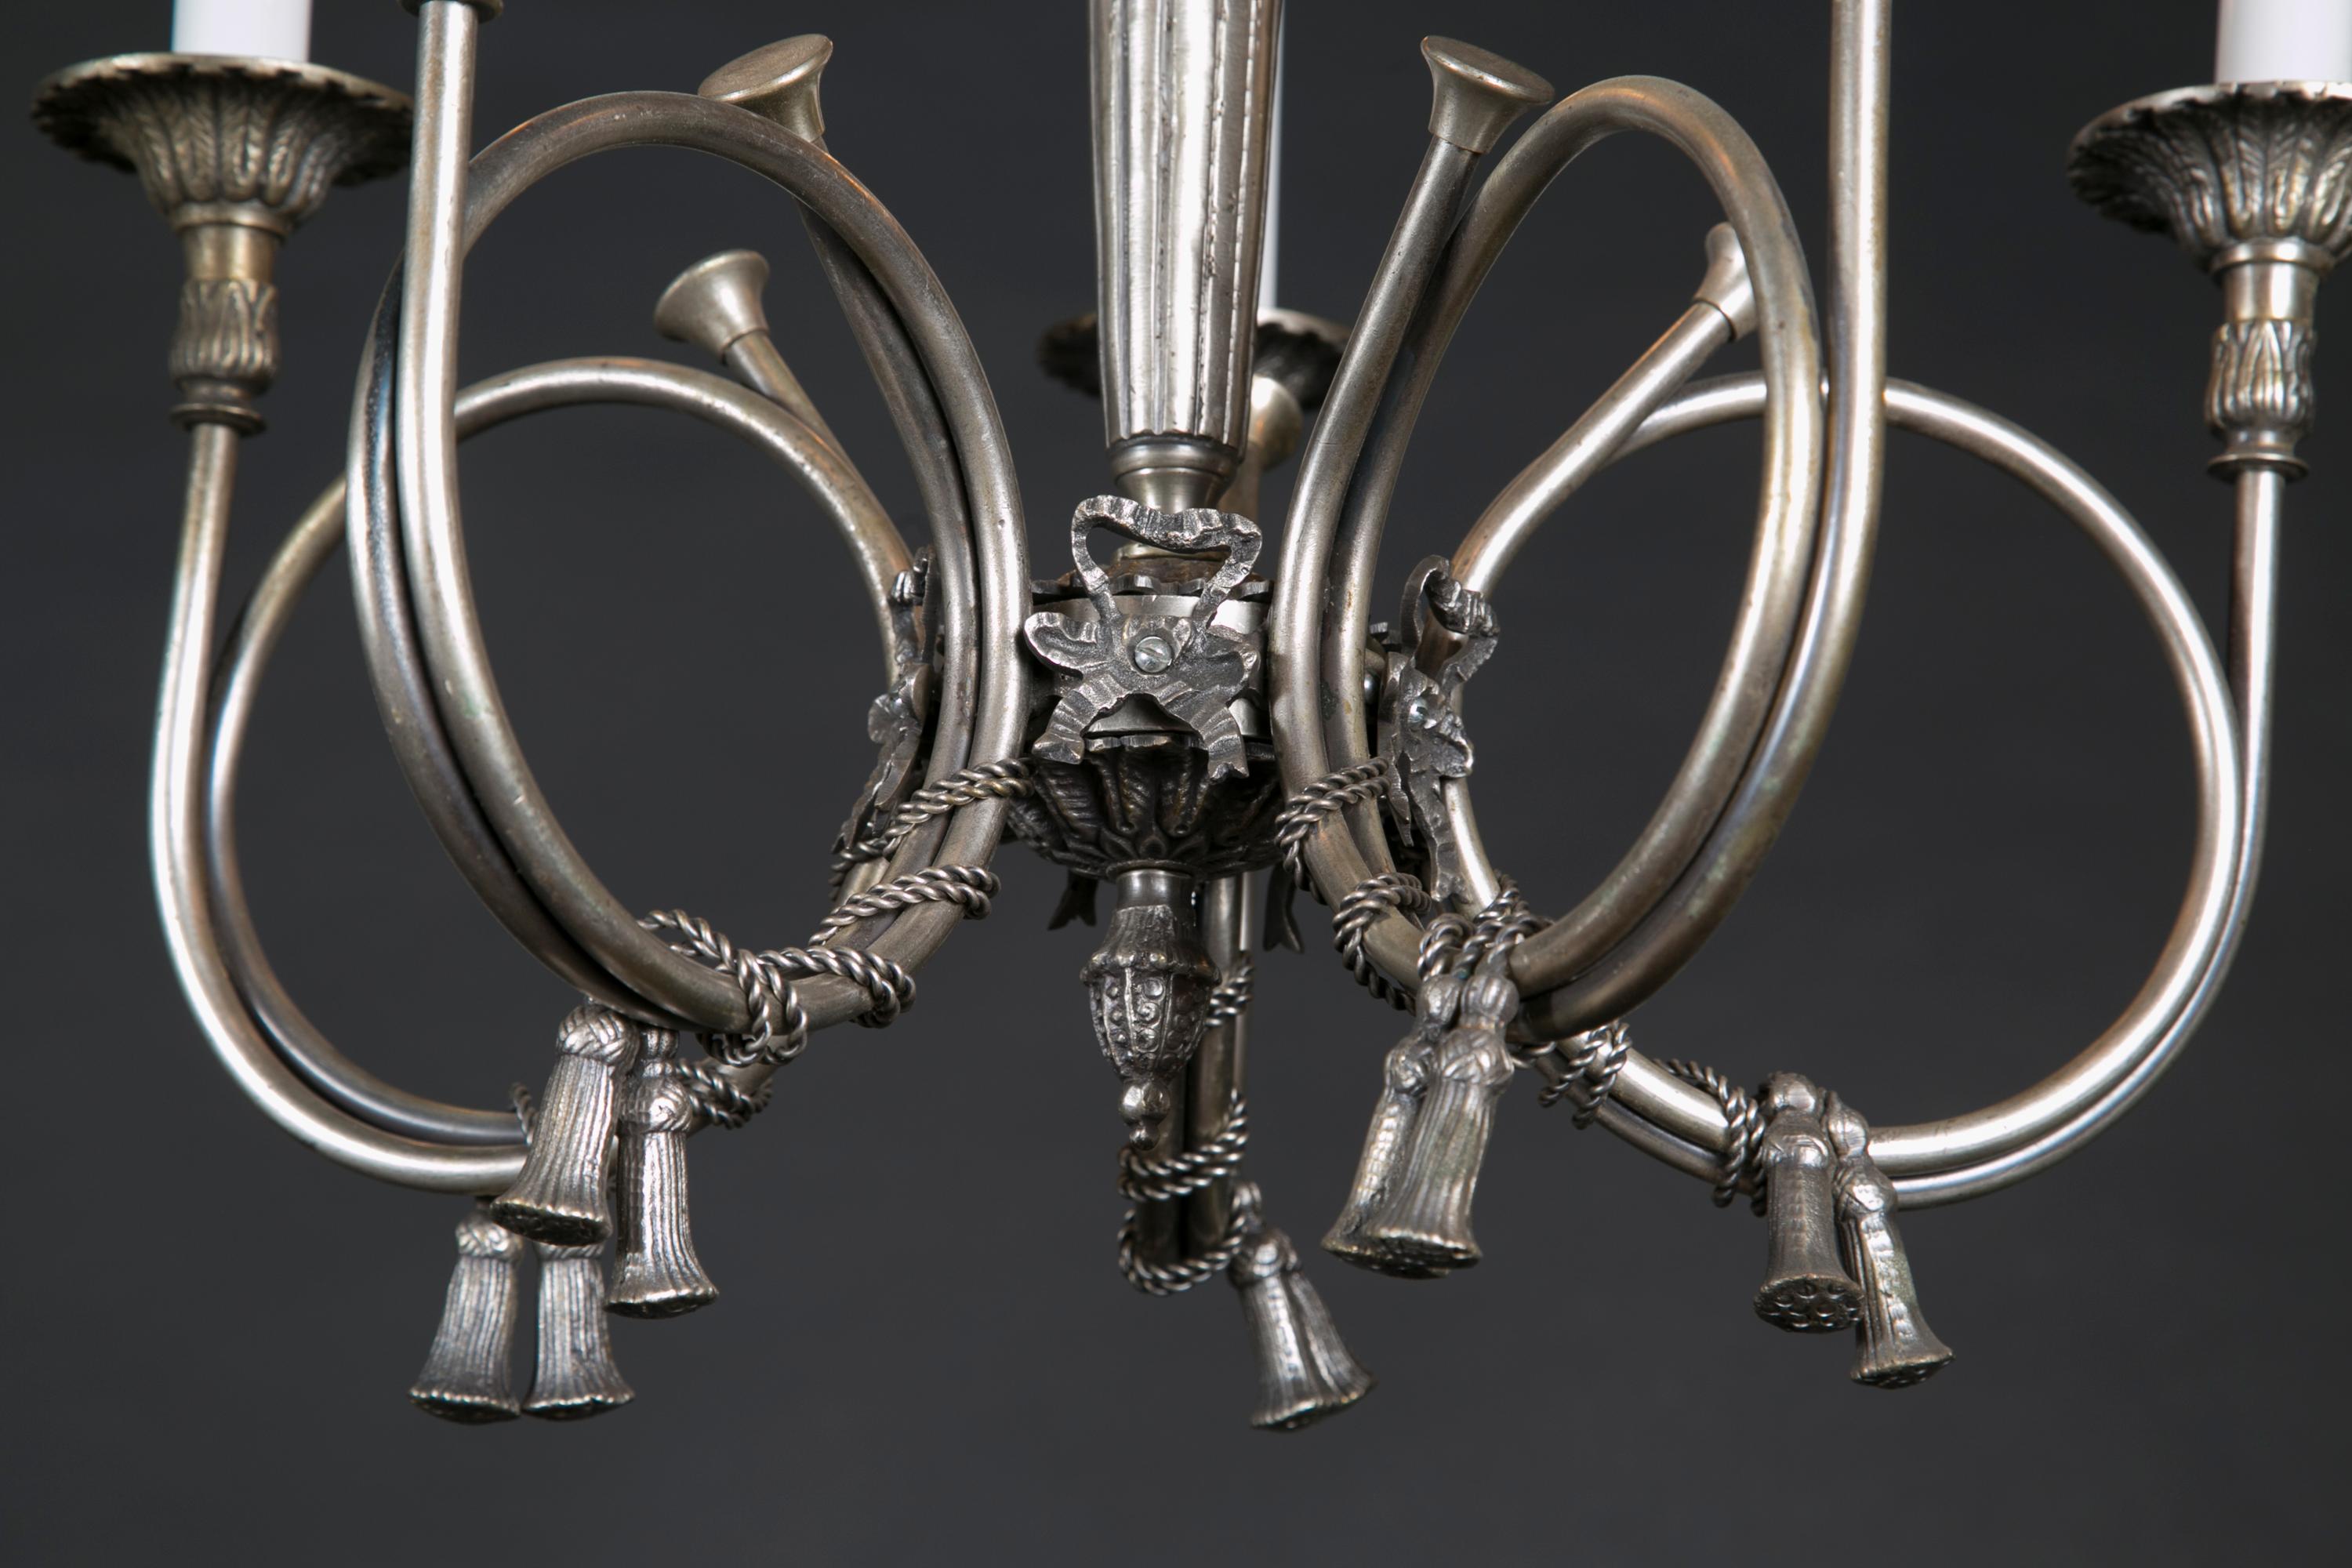 This French Belle Epoque chandelier is made of silvered brass, and features beautiful ‘French Horn’ arms draped with detailed rope and hung with tassels. The piece dates back to the early 20th century, and features acanthus leaves on top the fluted